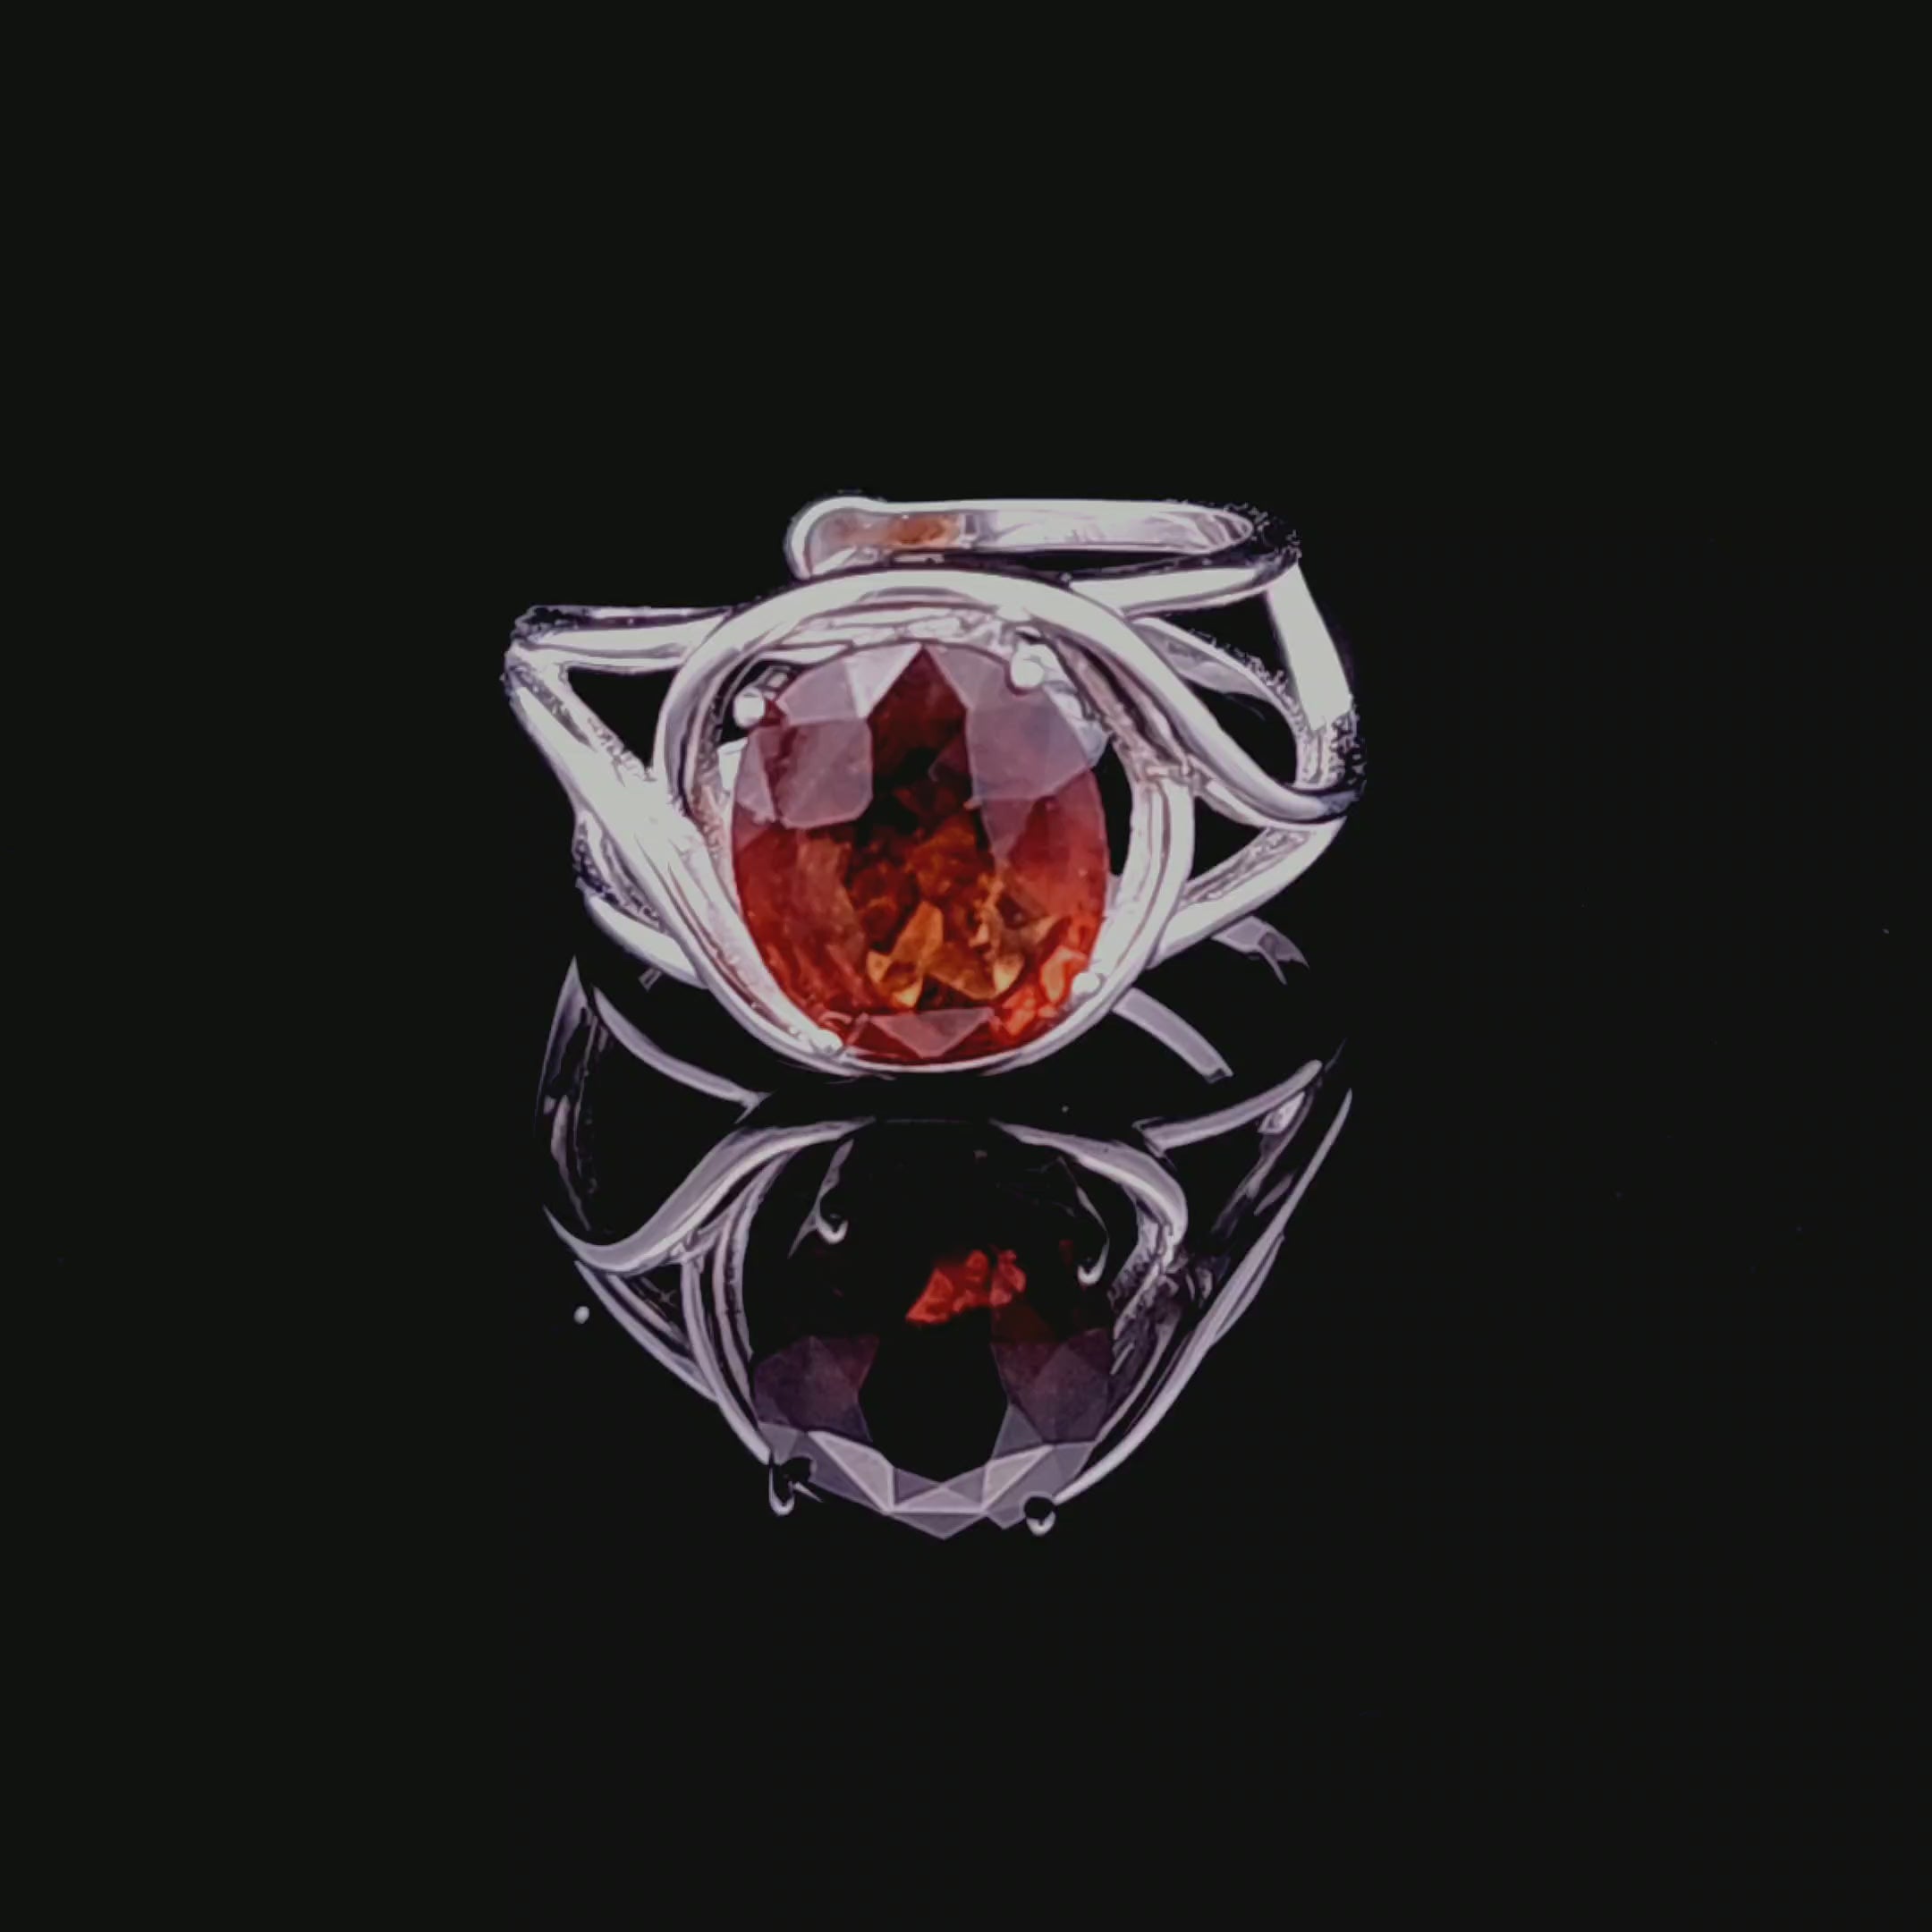 Spessartine Garnet Adjustable Finger Cuff Ring .925 Silver (High Quality) for Passion and Manifestation